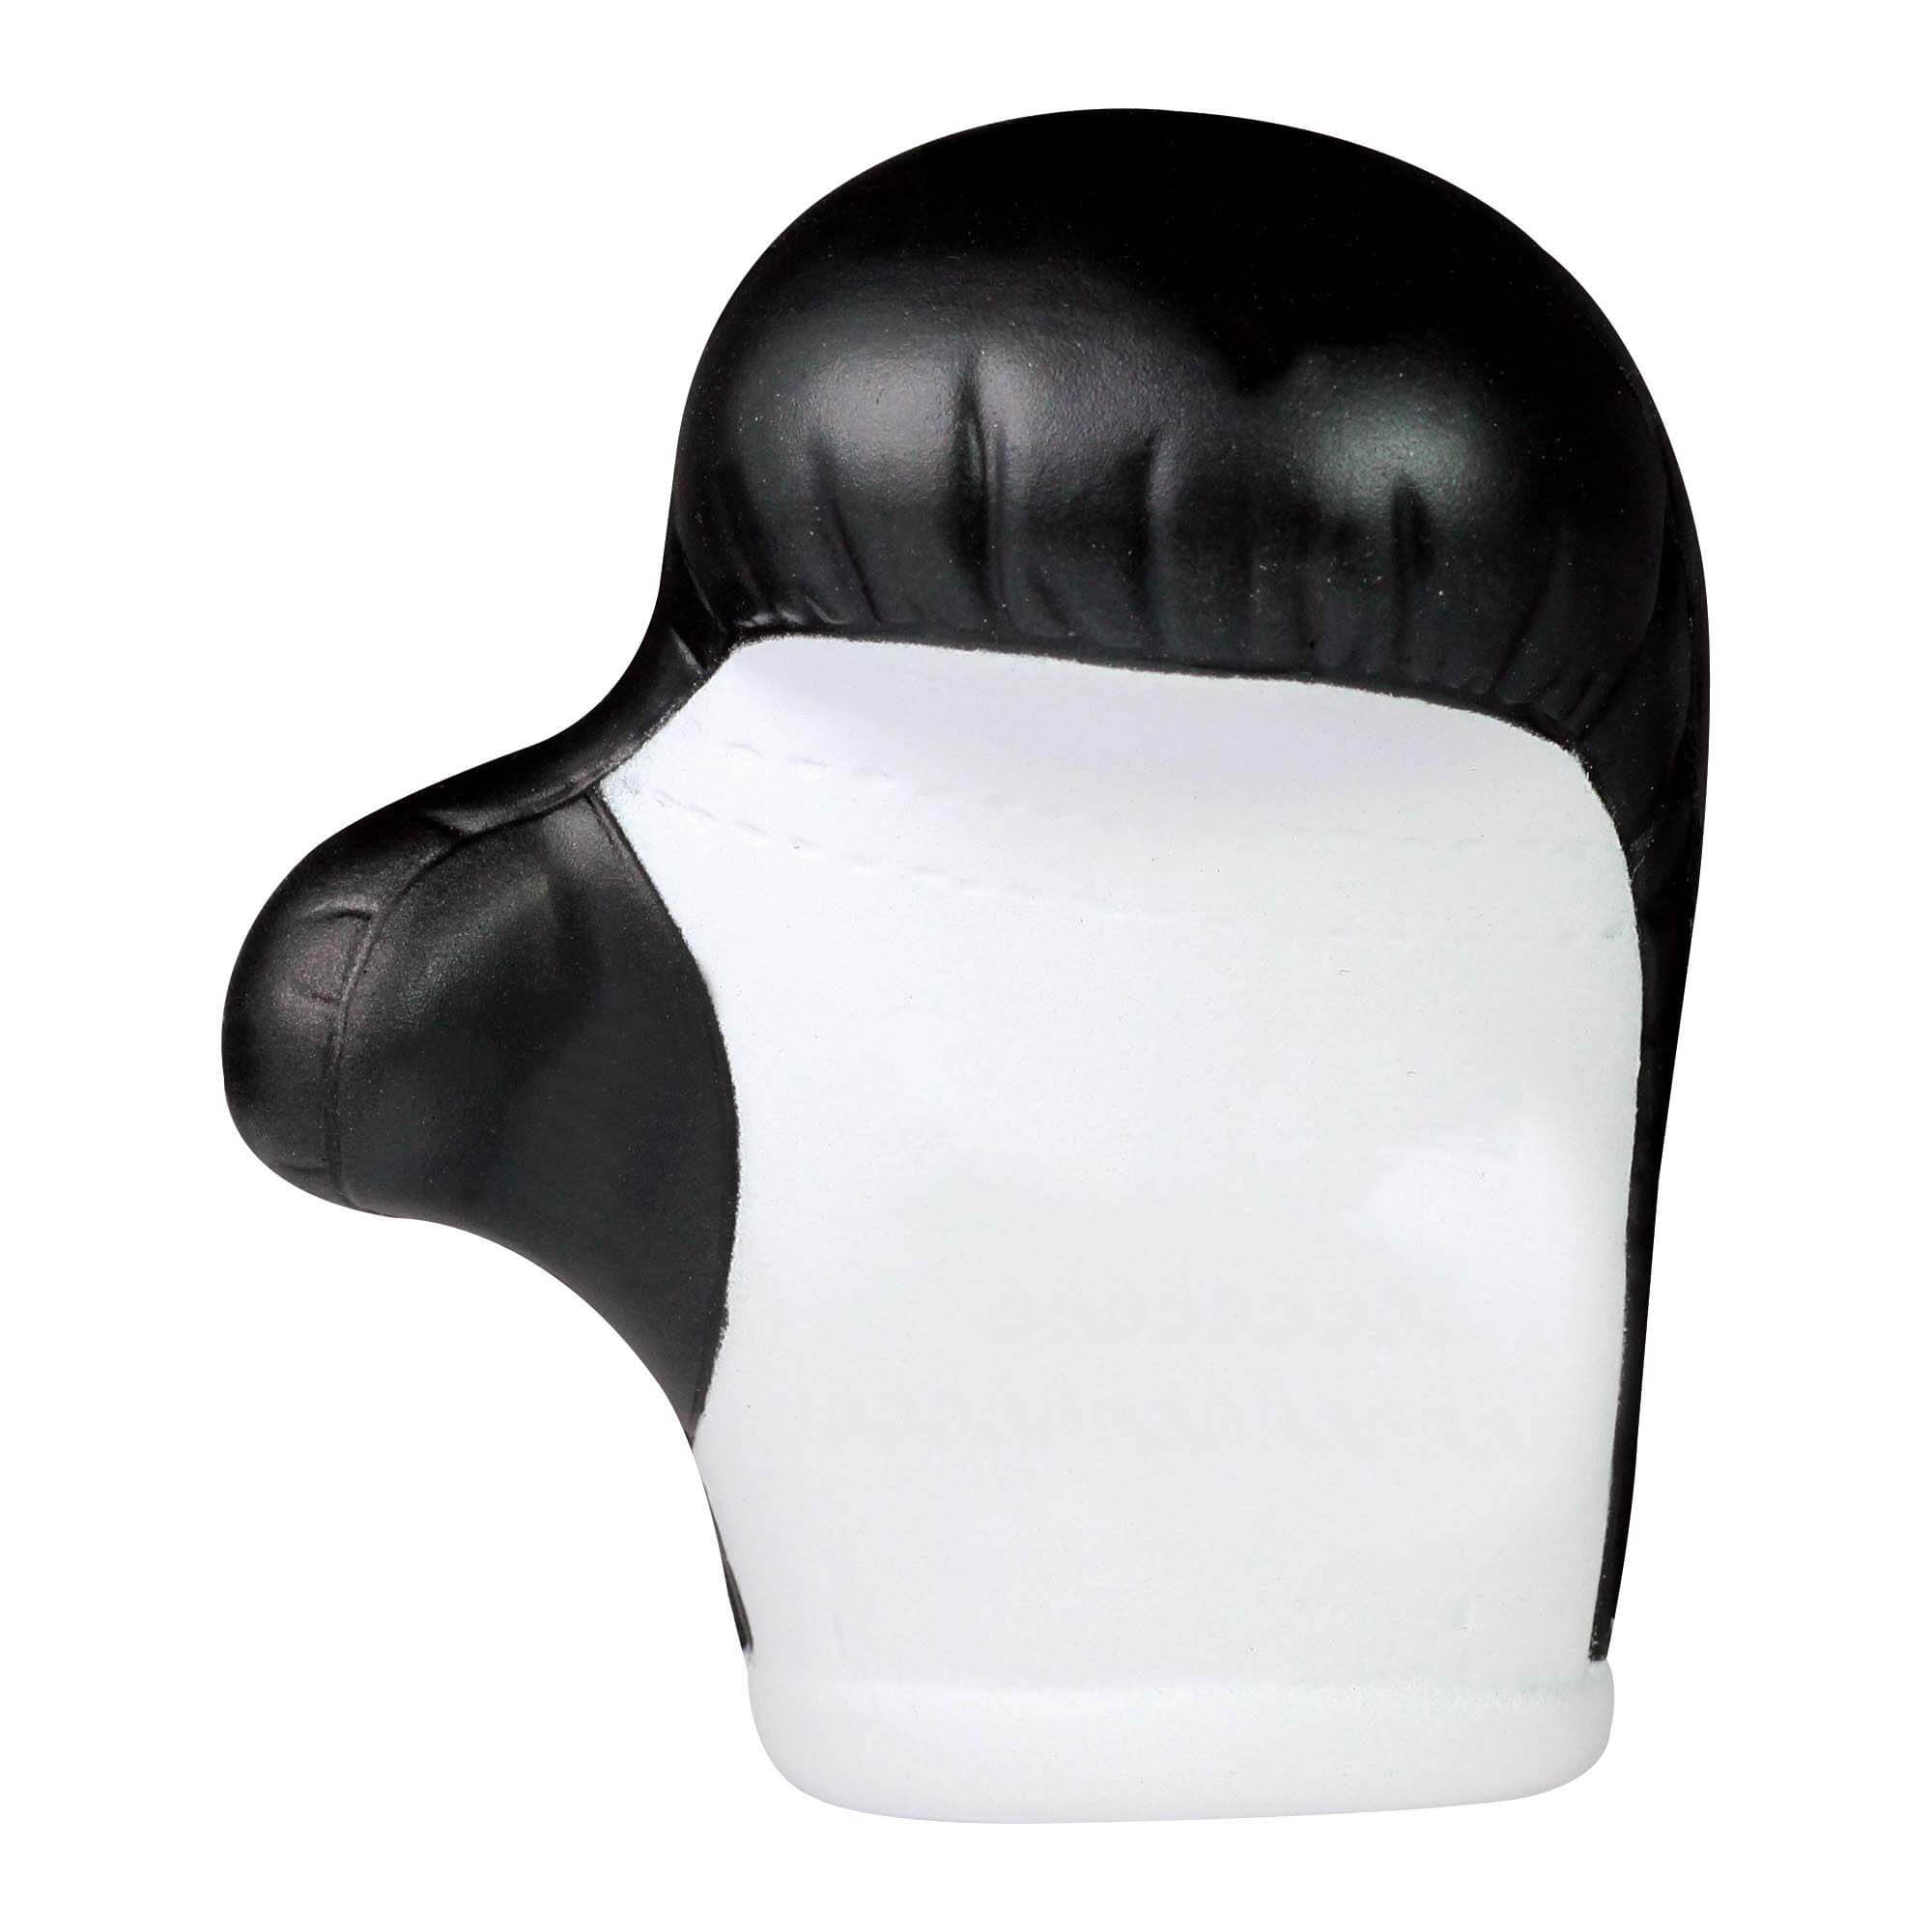 Boxing Glove Stress Ball Front View Black and White